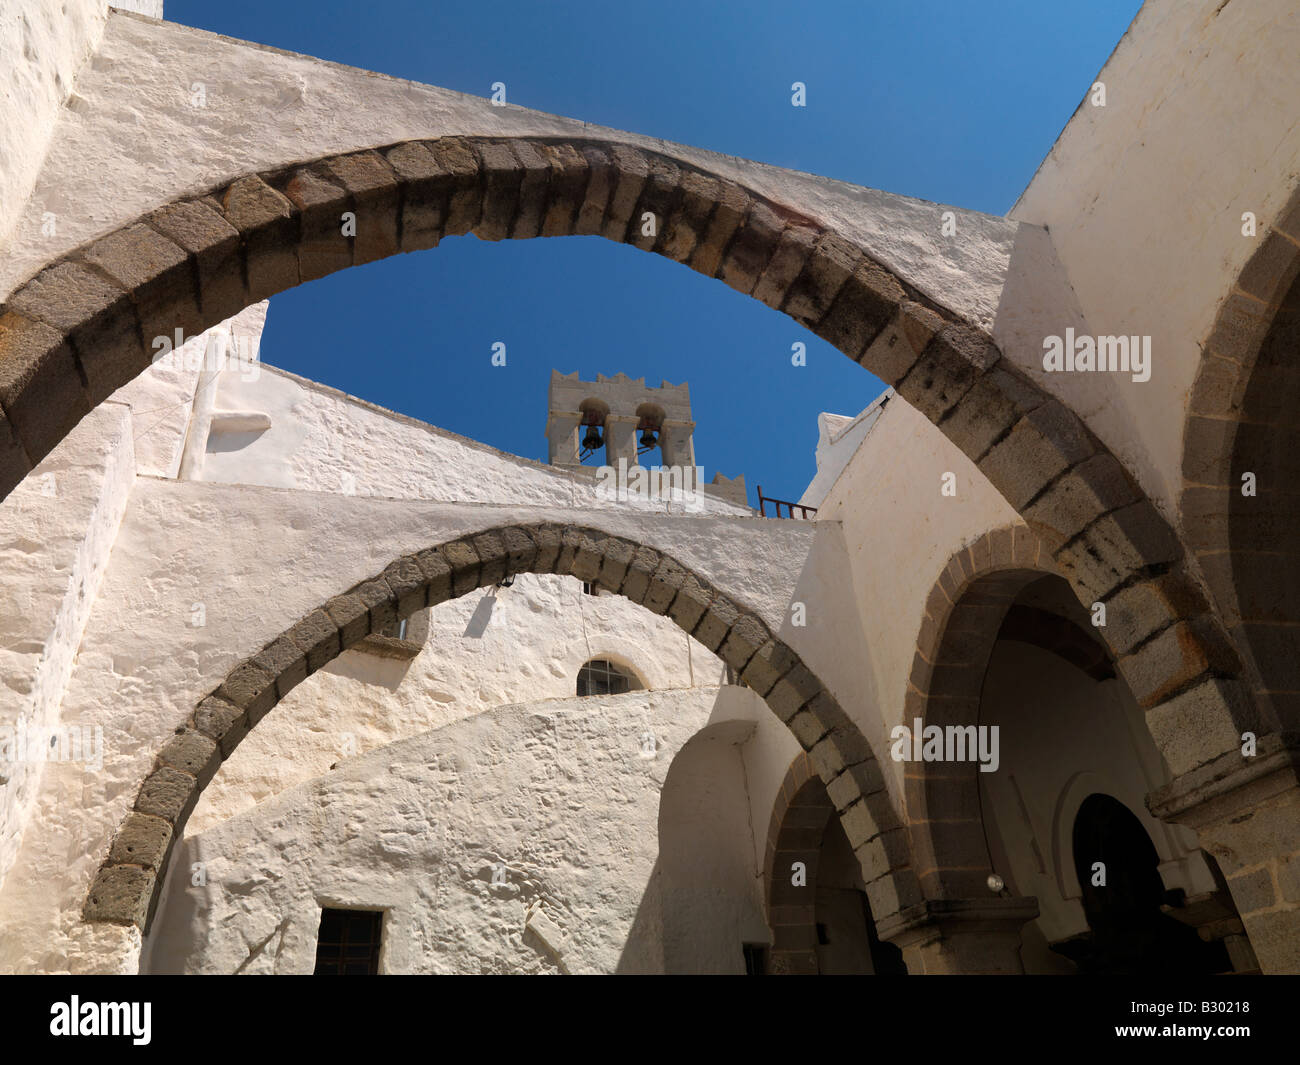 Patmos Greece Arches and Bells at the Monastery of Saint John the Theologian Stock Photo